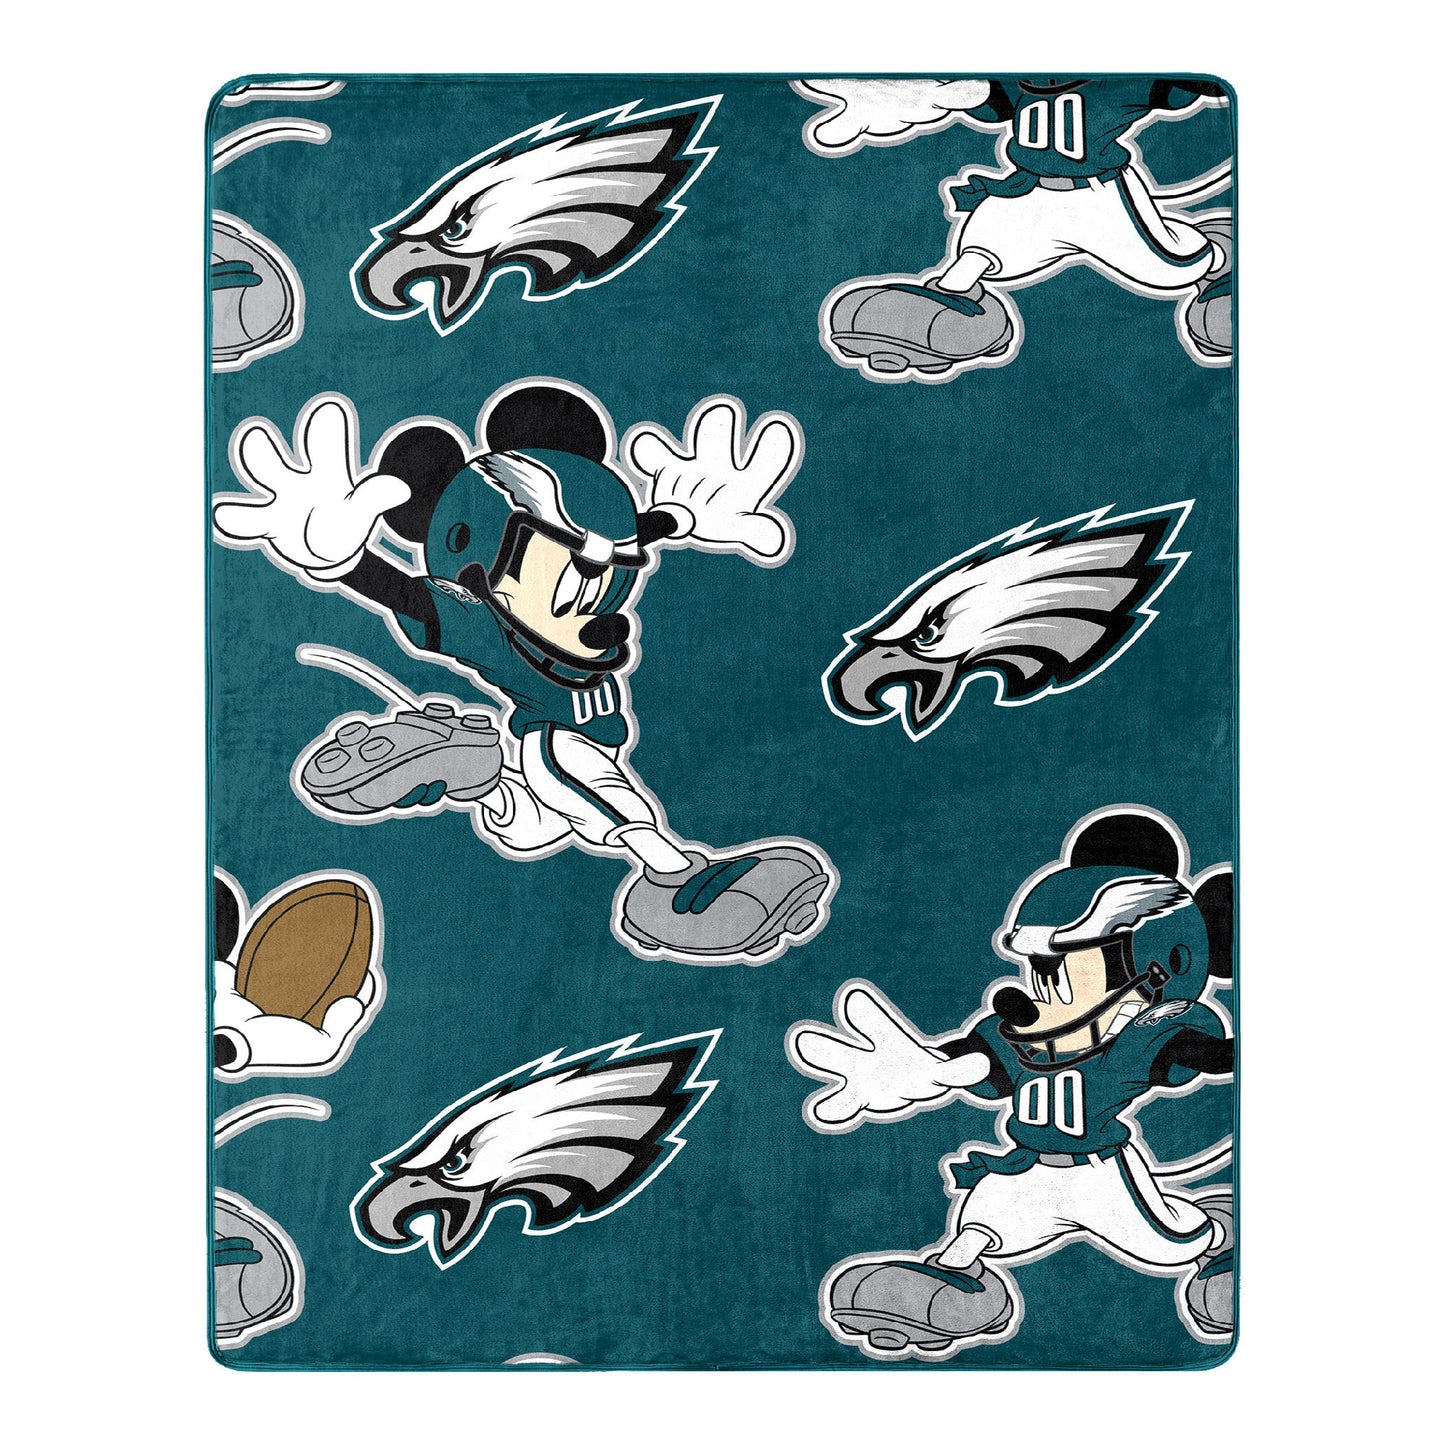 Eagles OFFICIAL NFL & Disney's Mickey Mouse Character Hugger Pillow & Silk Touch Throw Set;  40" x 50"